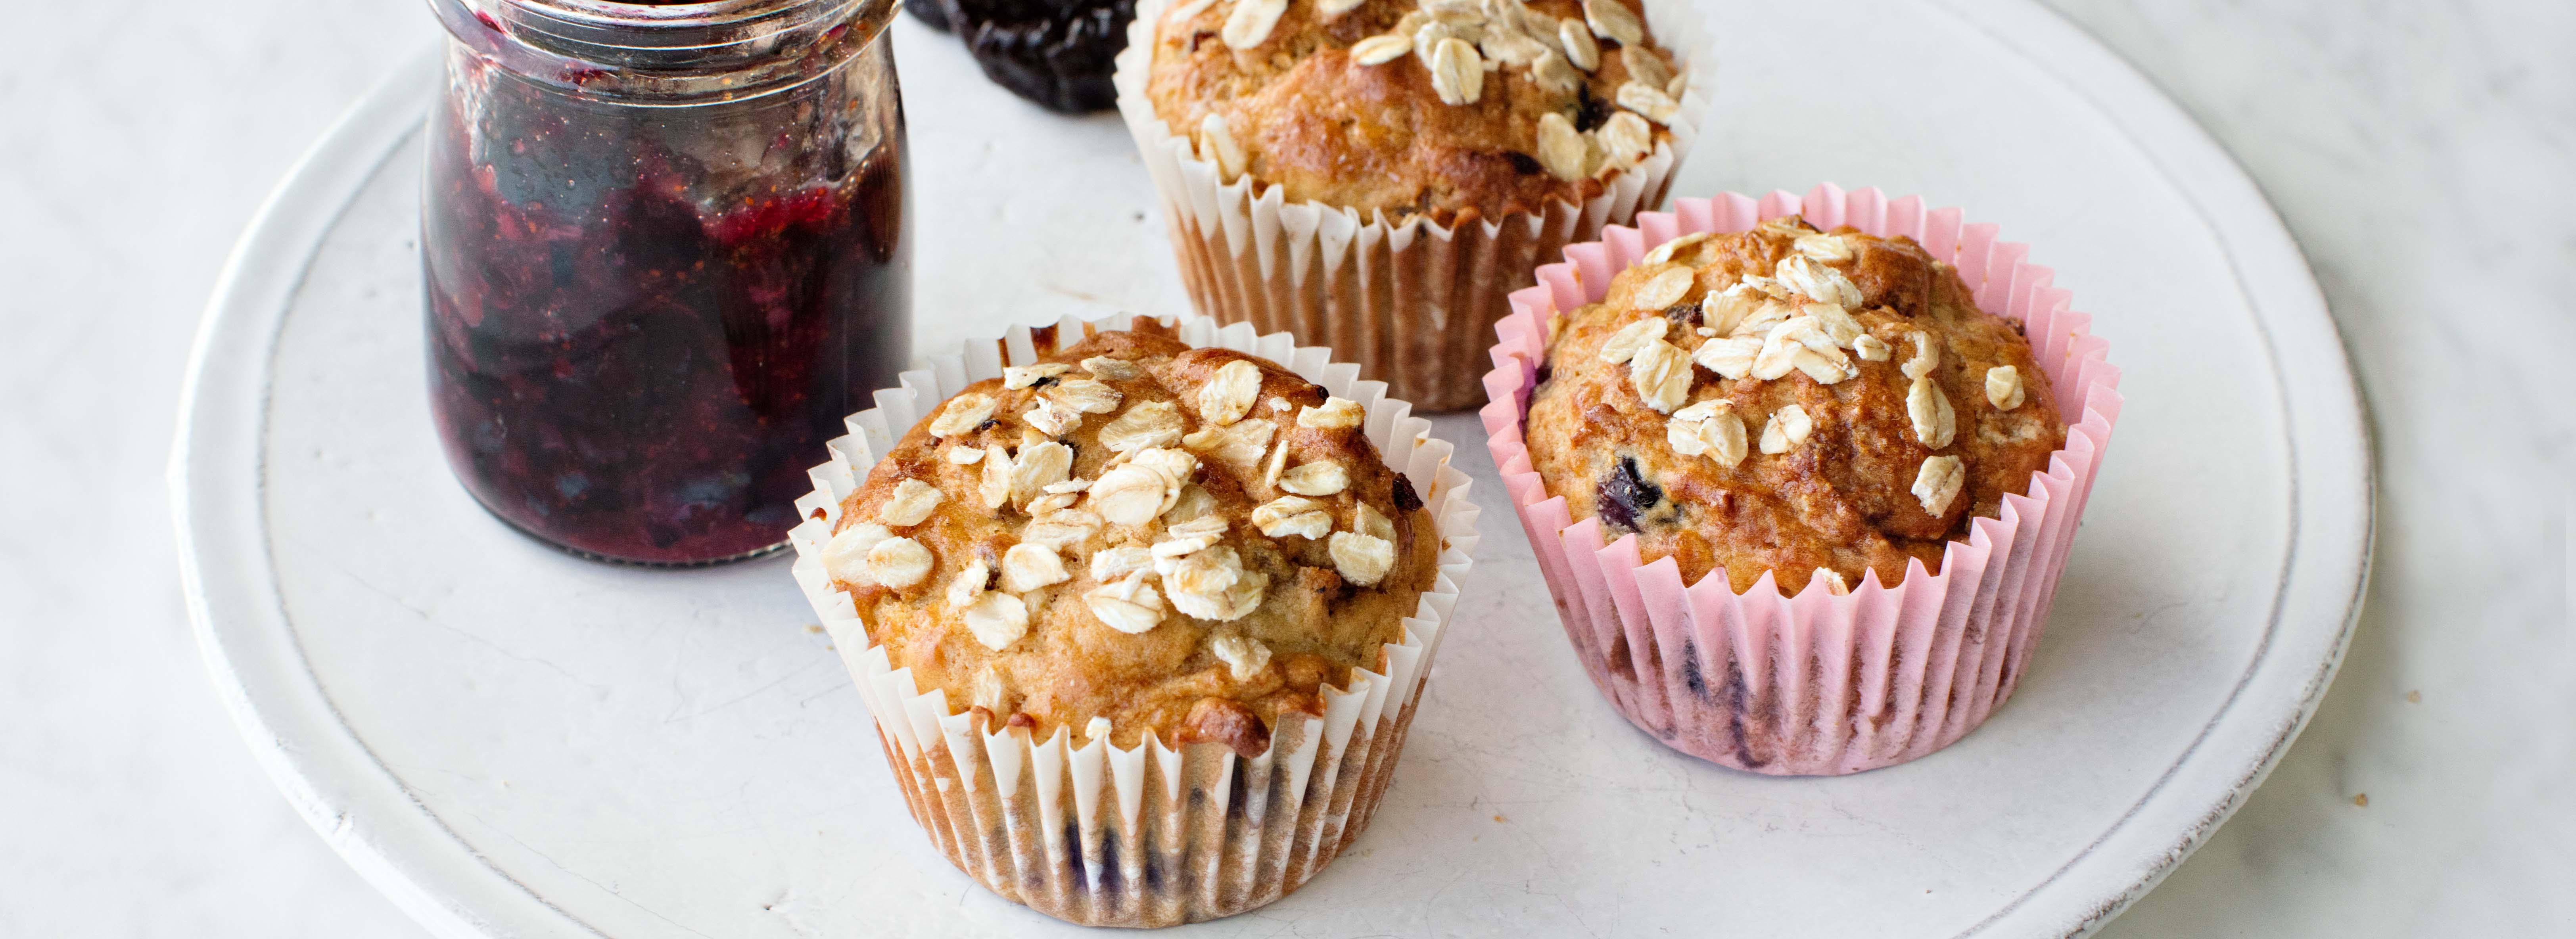 Because prunes provide a greater depth of sweetness, these muffins have less sugar. Yogurt lightens the crumb and provides a small amount of tanginess.